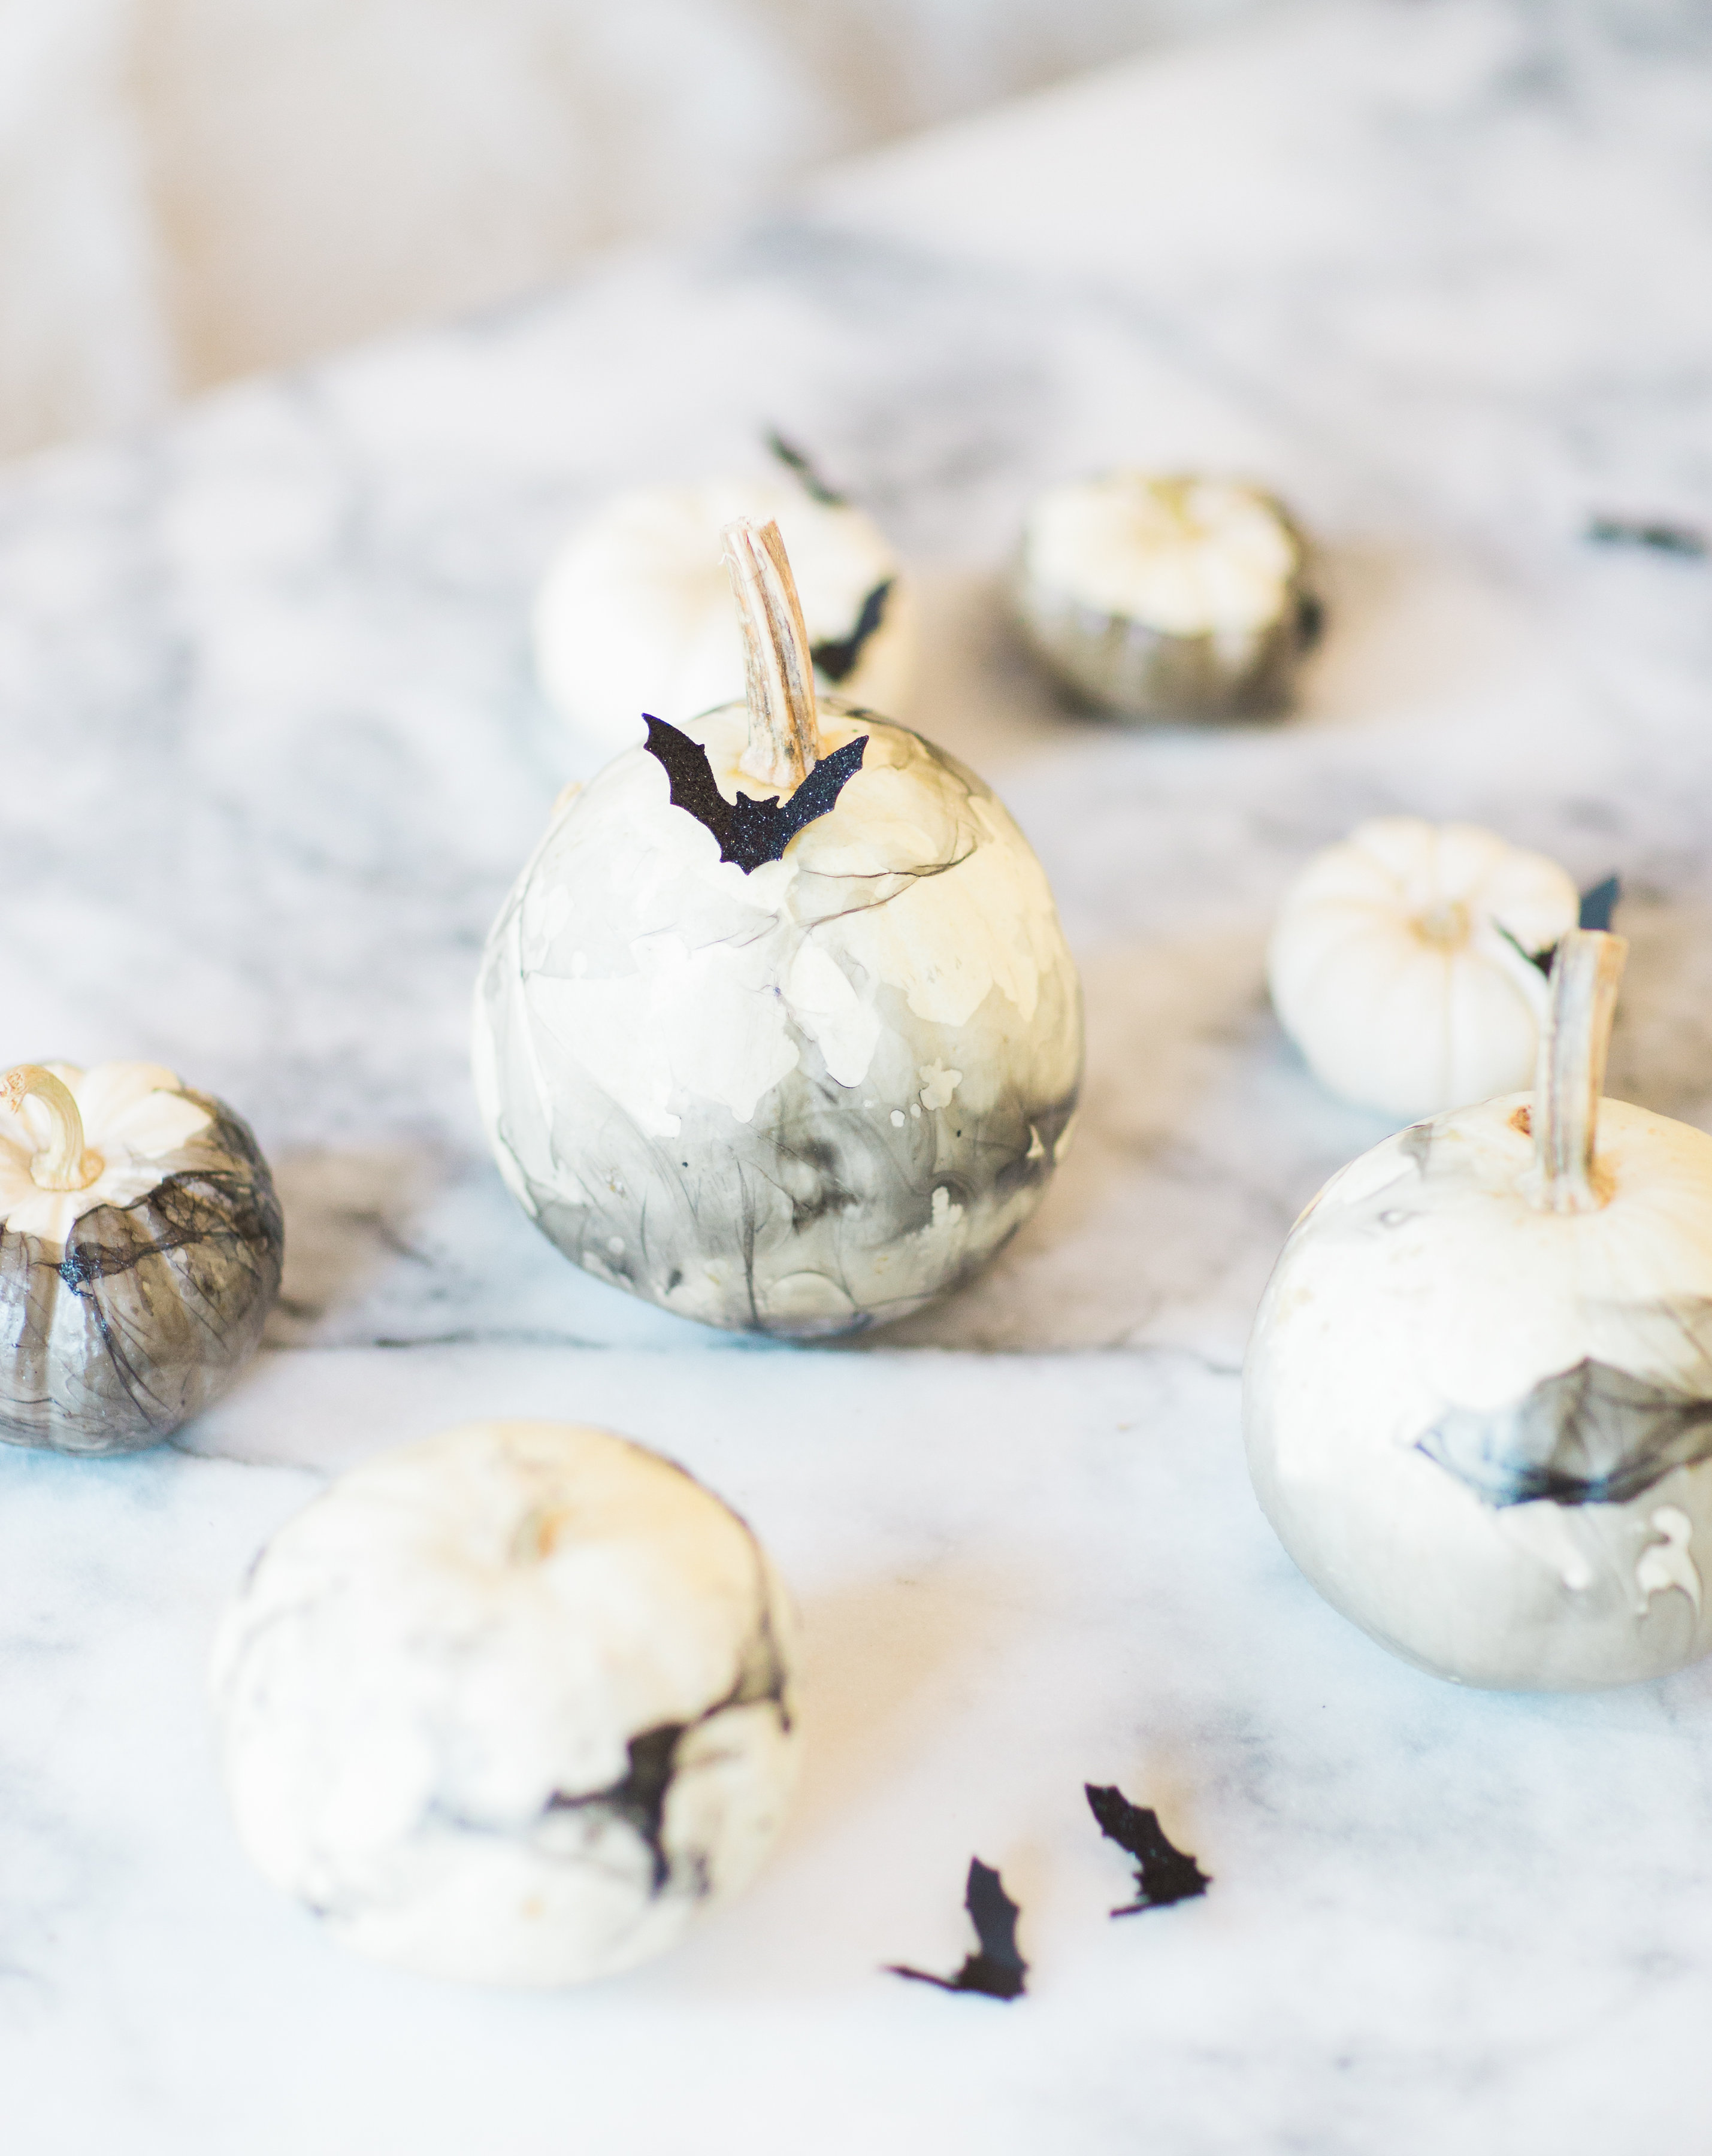 How to make chic and easy DIY marbled pumpkins (perfect for Halloween!) Click through for the details. | glitterinc.com | @glitterinc